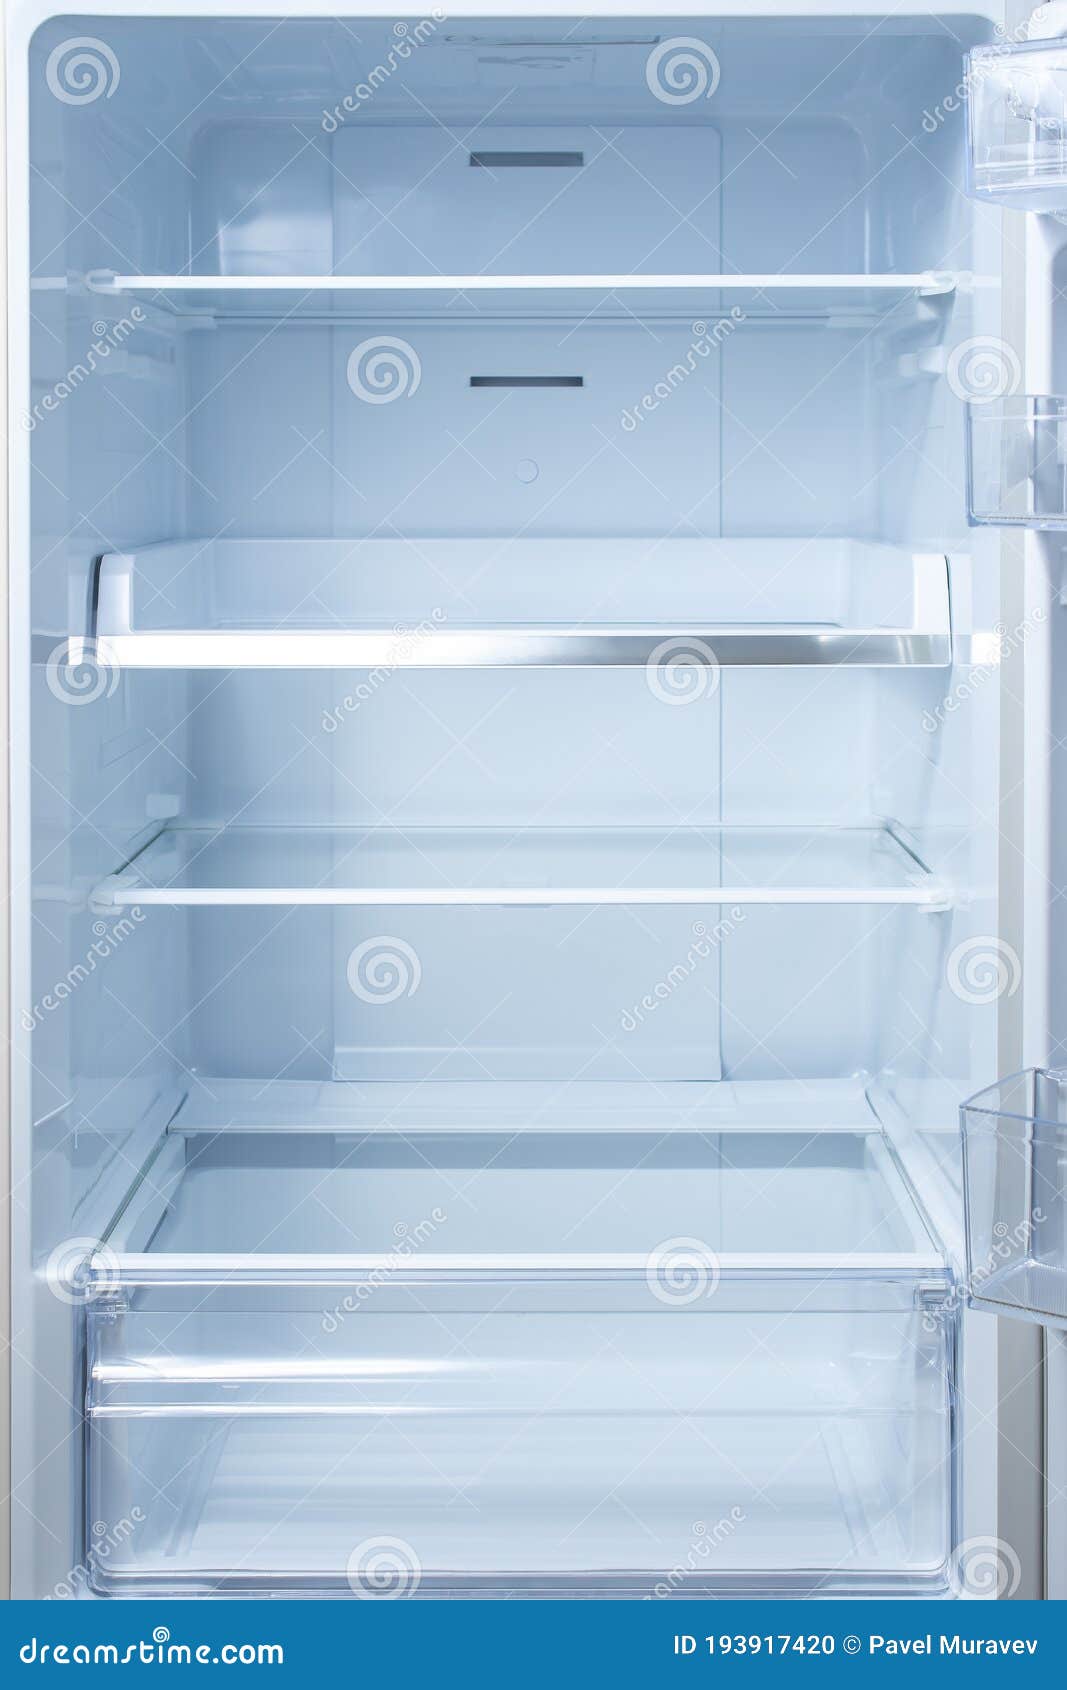 Download Empty Open Fridge With Shelves Refrigerator Mockup Background Empty Shelves For Your Products Stock Photo Image Of Icebox Domestic 193917420